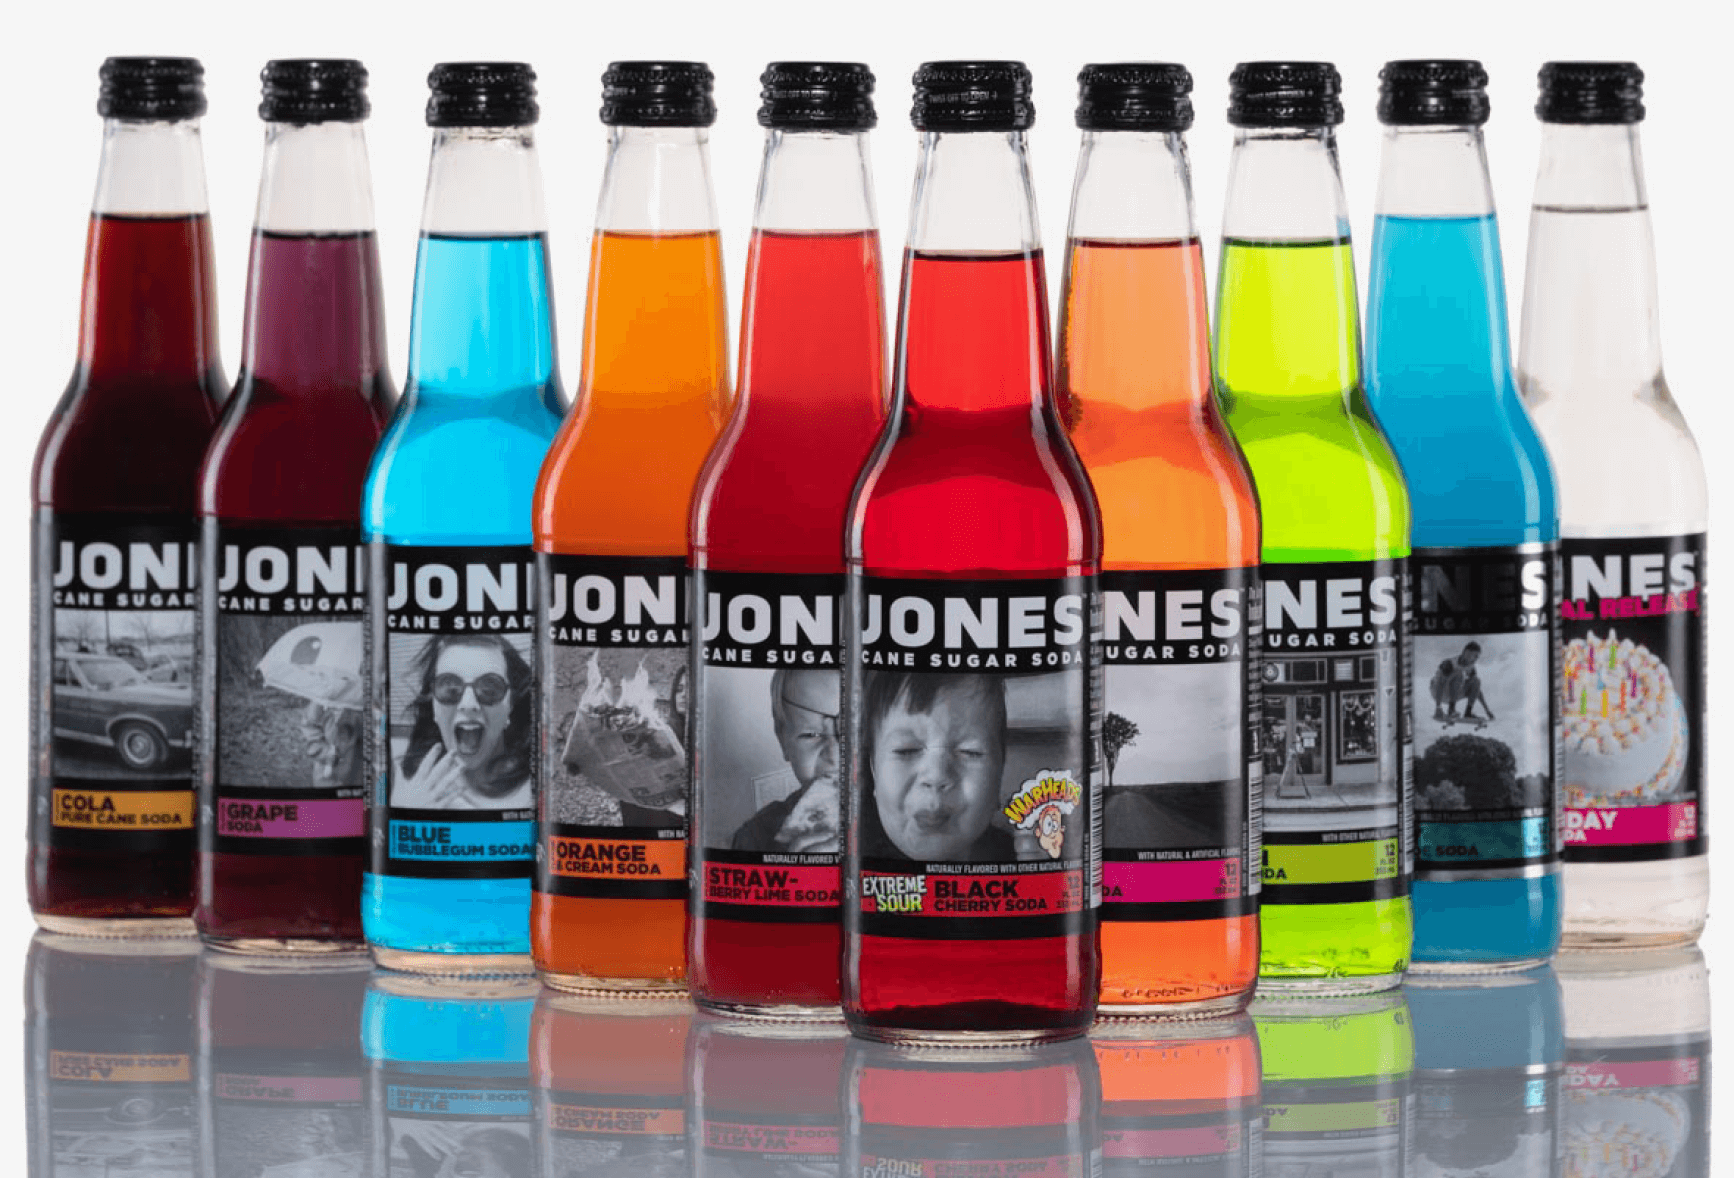 Johnny Jones slushie collection includes a variety of delicious frozen beverages, each expertly crafted and carefully packaged for ultimate freshness. With a wide range of flavors to choose from, you can enjoy the refreshing